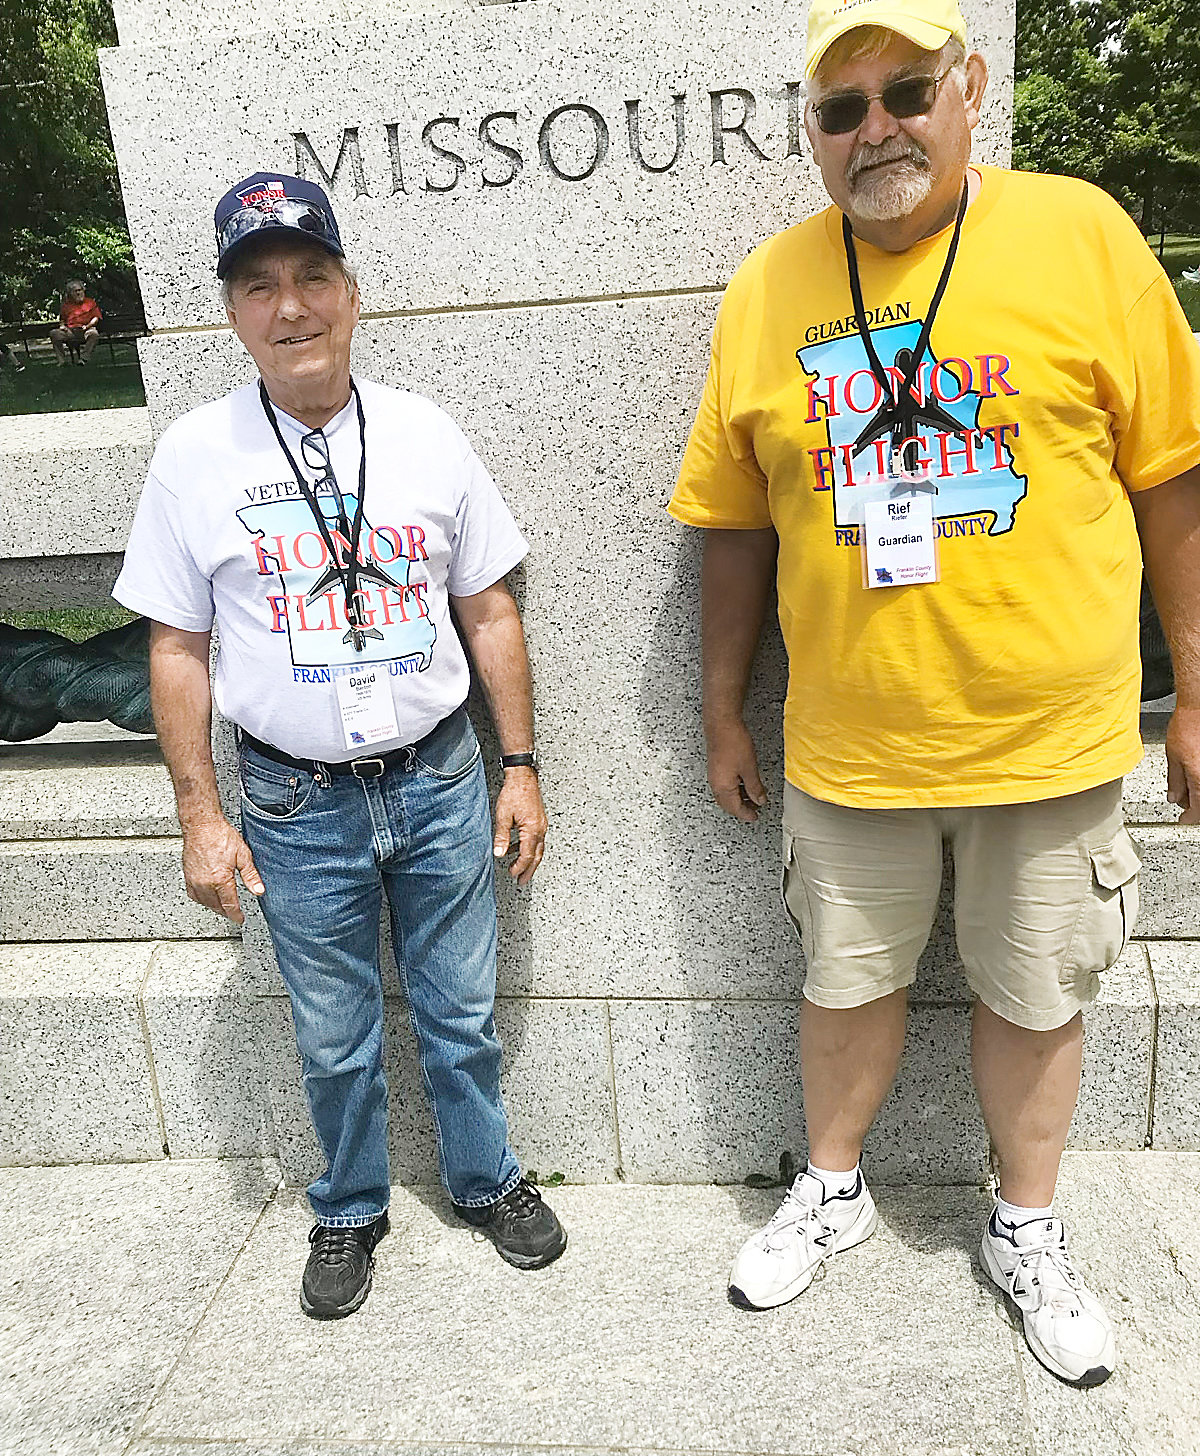 Mike Riefer (right) was the guardian for David Benton from Gerald. Benton is a Vietnam Veteran.